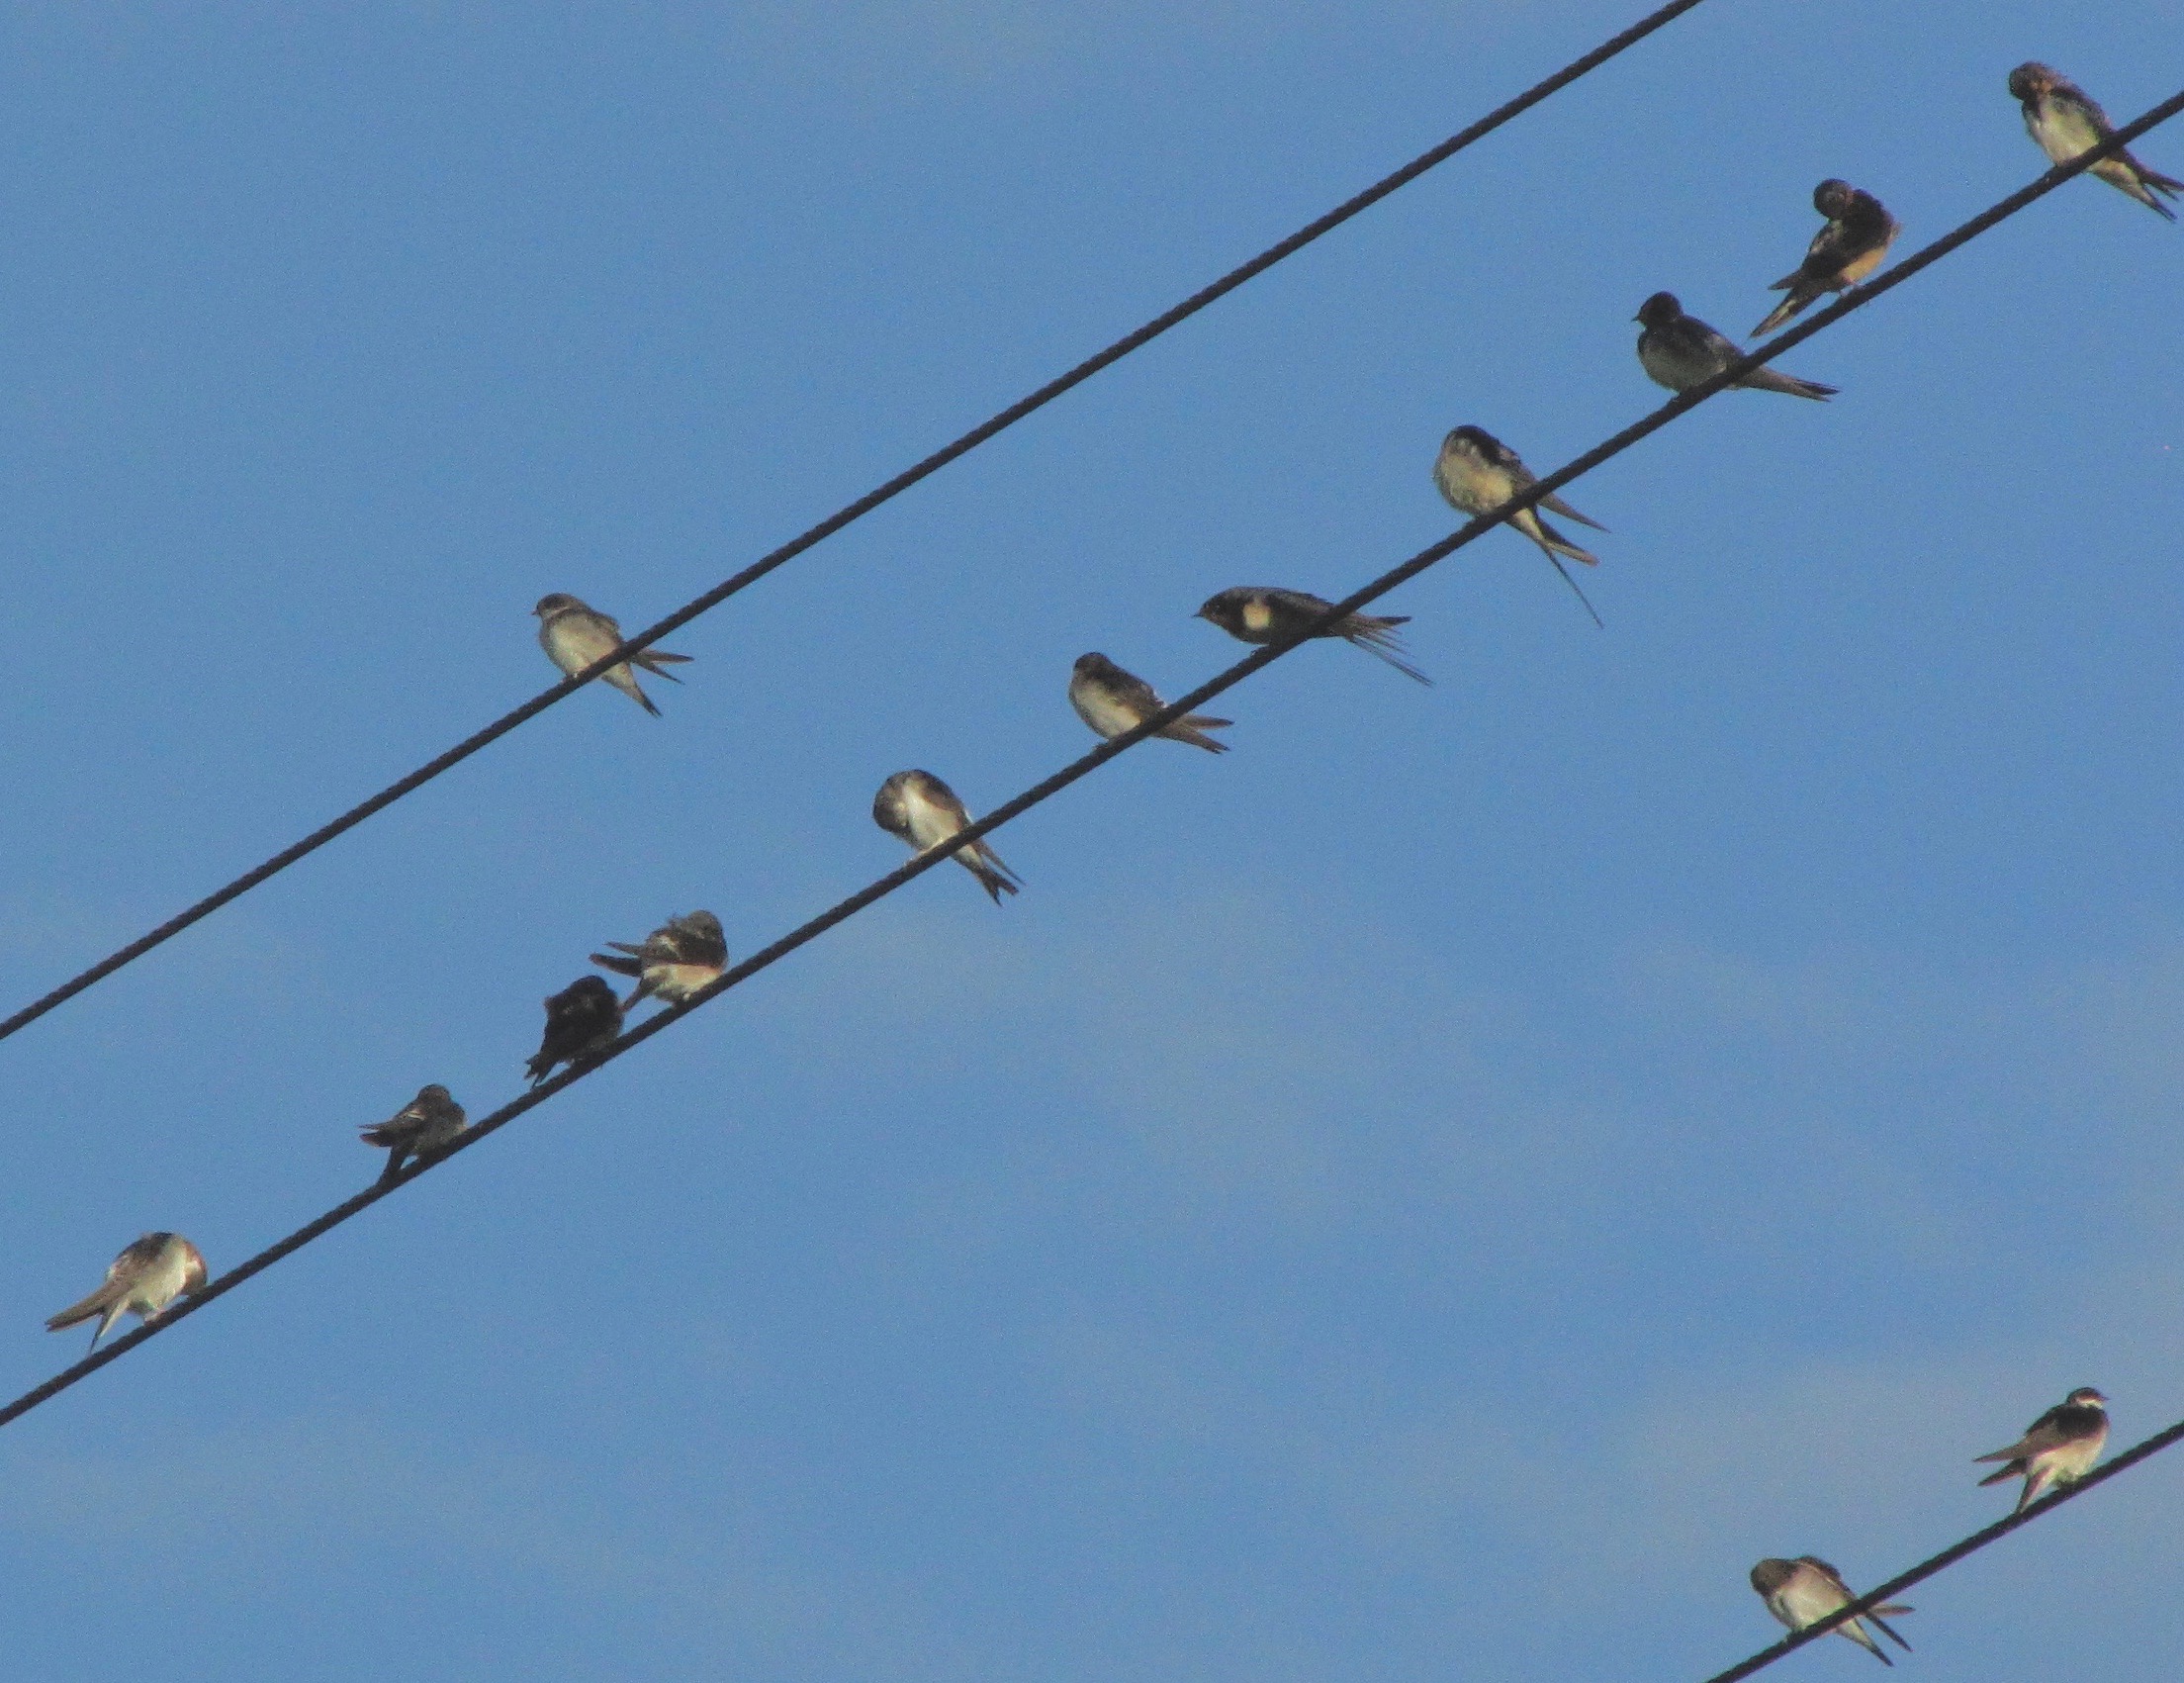 Swallows, Swifts and Martins.